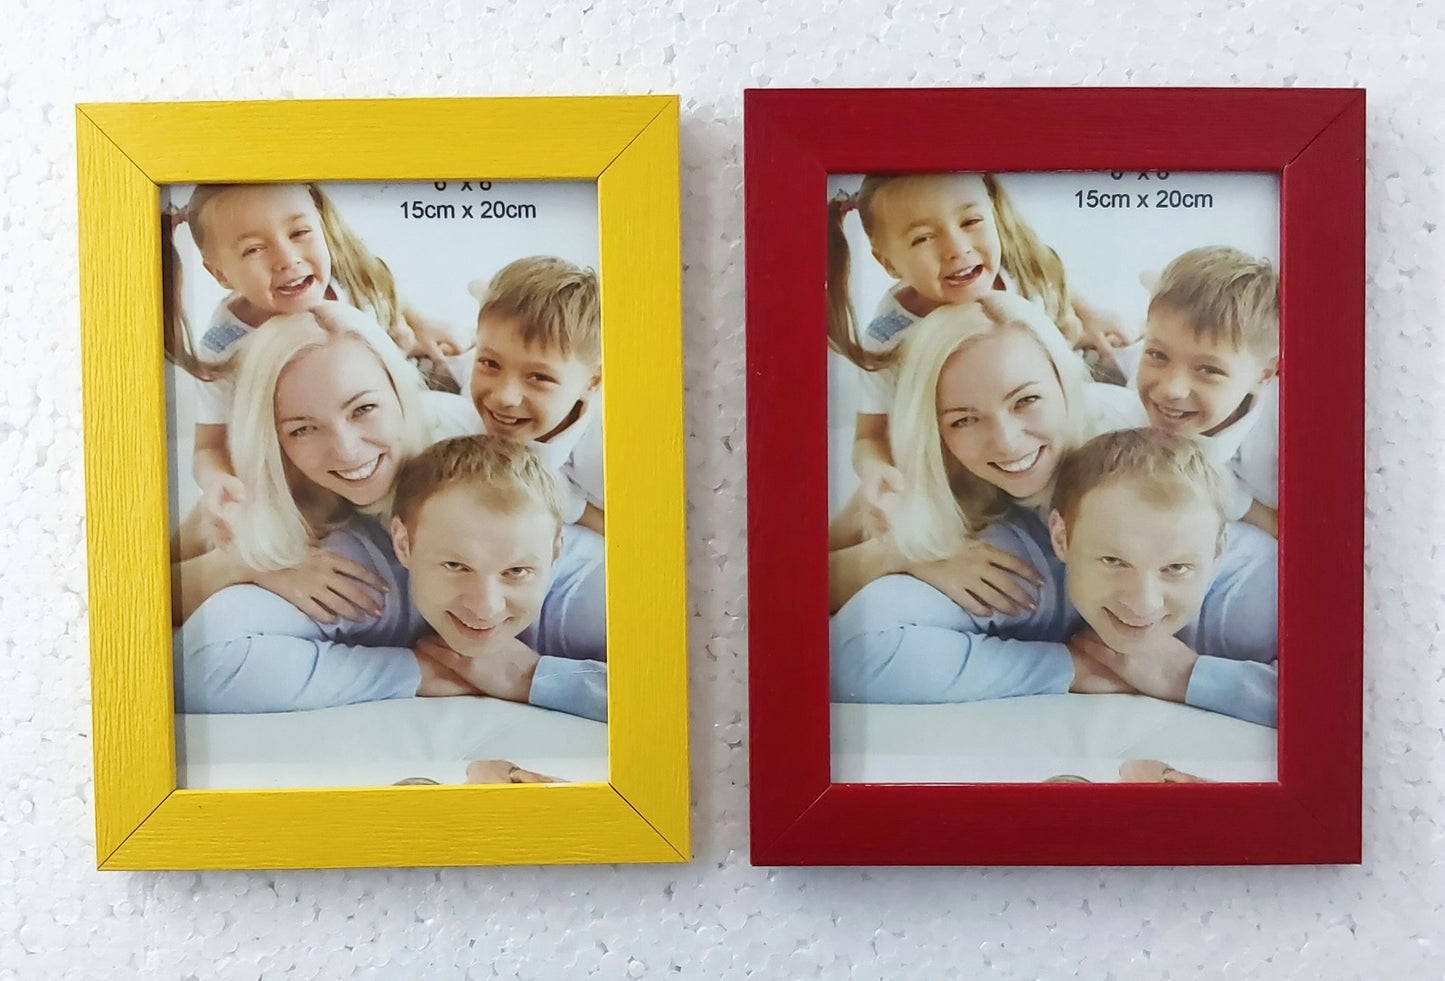 Color Photo frame 6x8 Inch Glass & Synthetic Wood Modern Photo Frames for Table and Wall Hanging (10 Pcs)